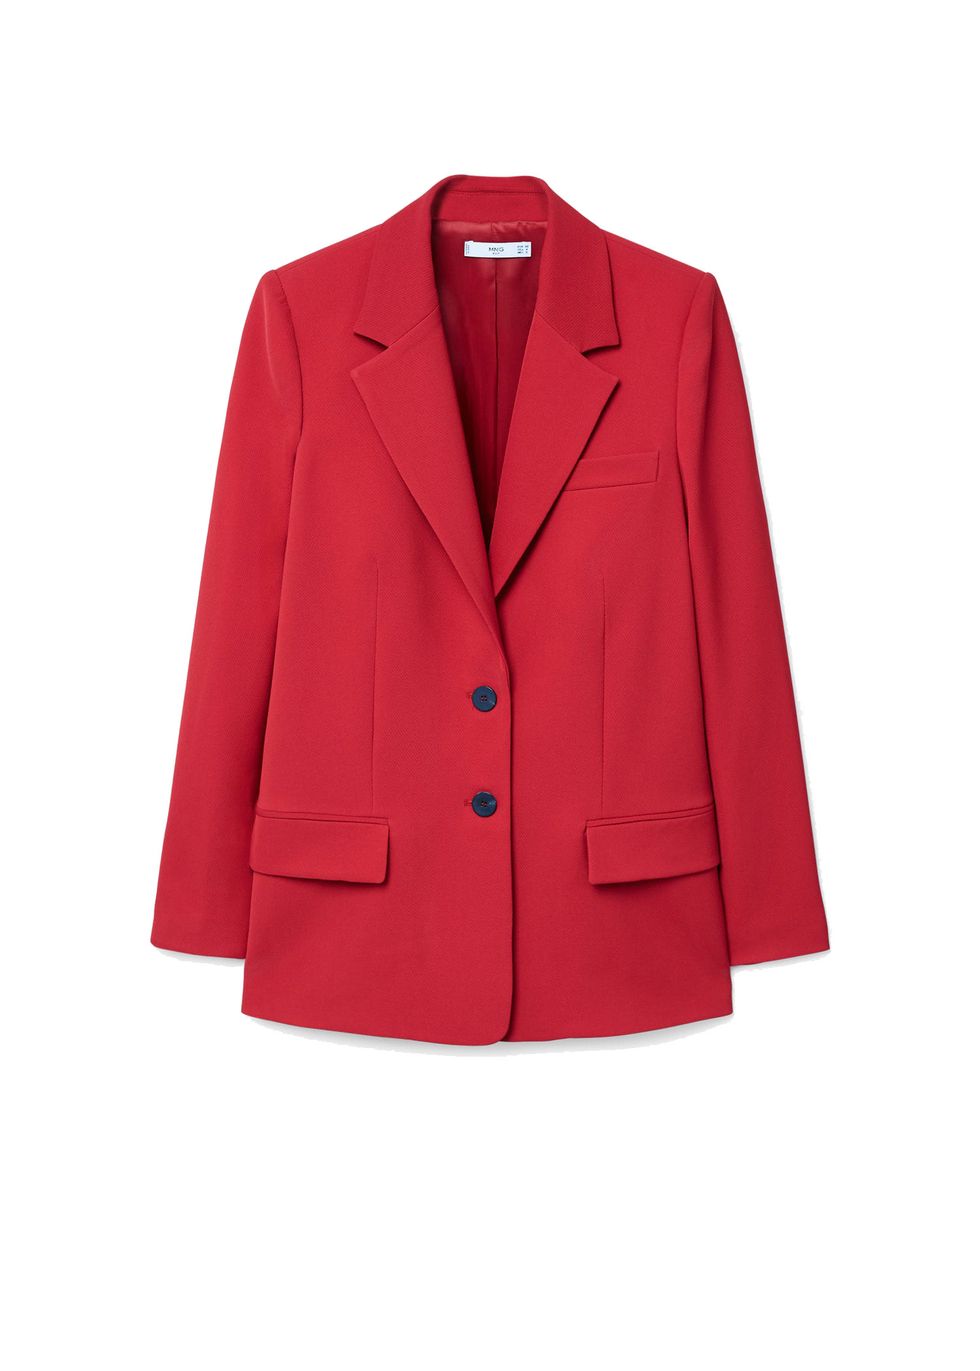 Clothing, Outerwear, Jacket, Blazer, Red, Sleeve, Button, Suit, Formal wear, Top, 